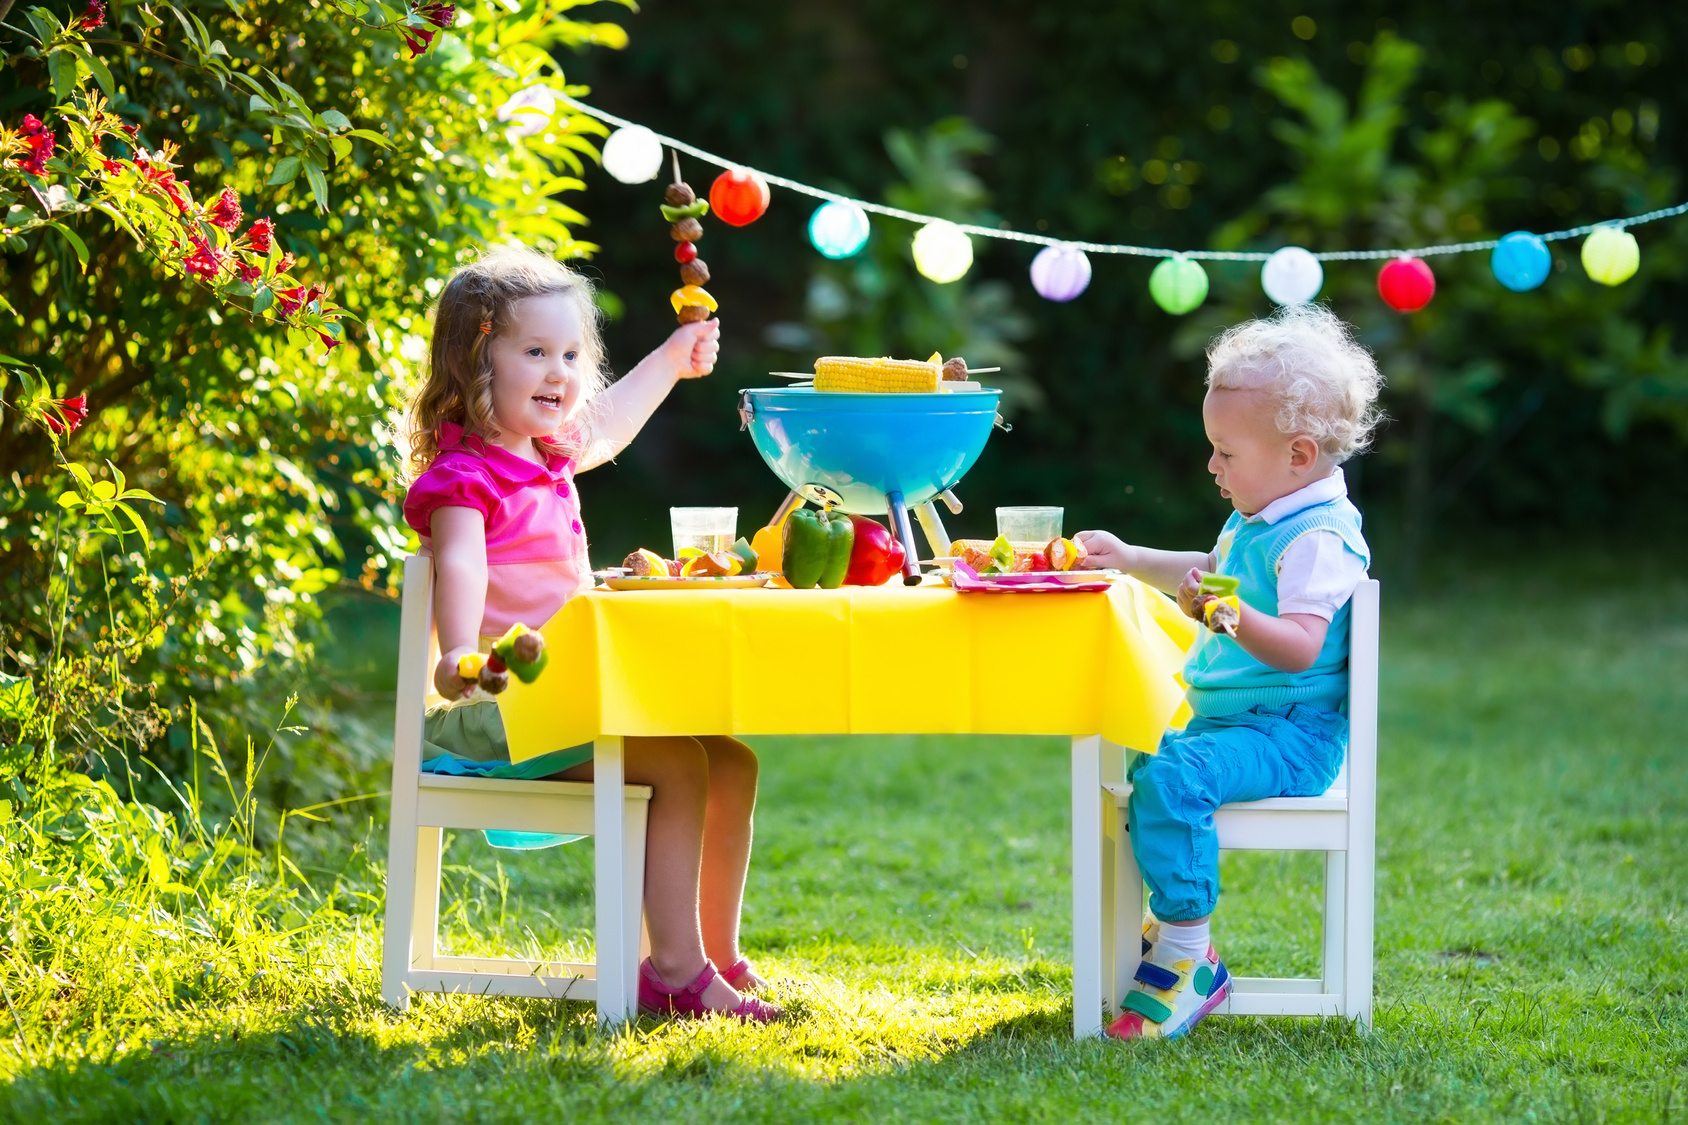 Kids play at a table outside